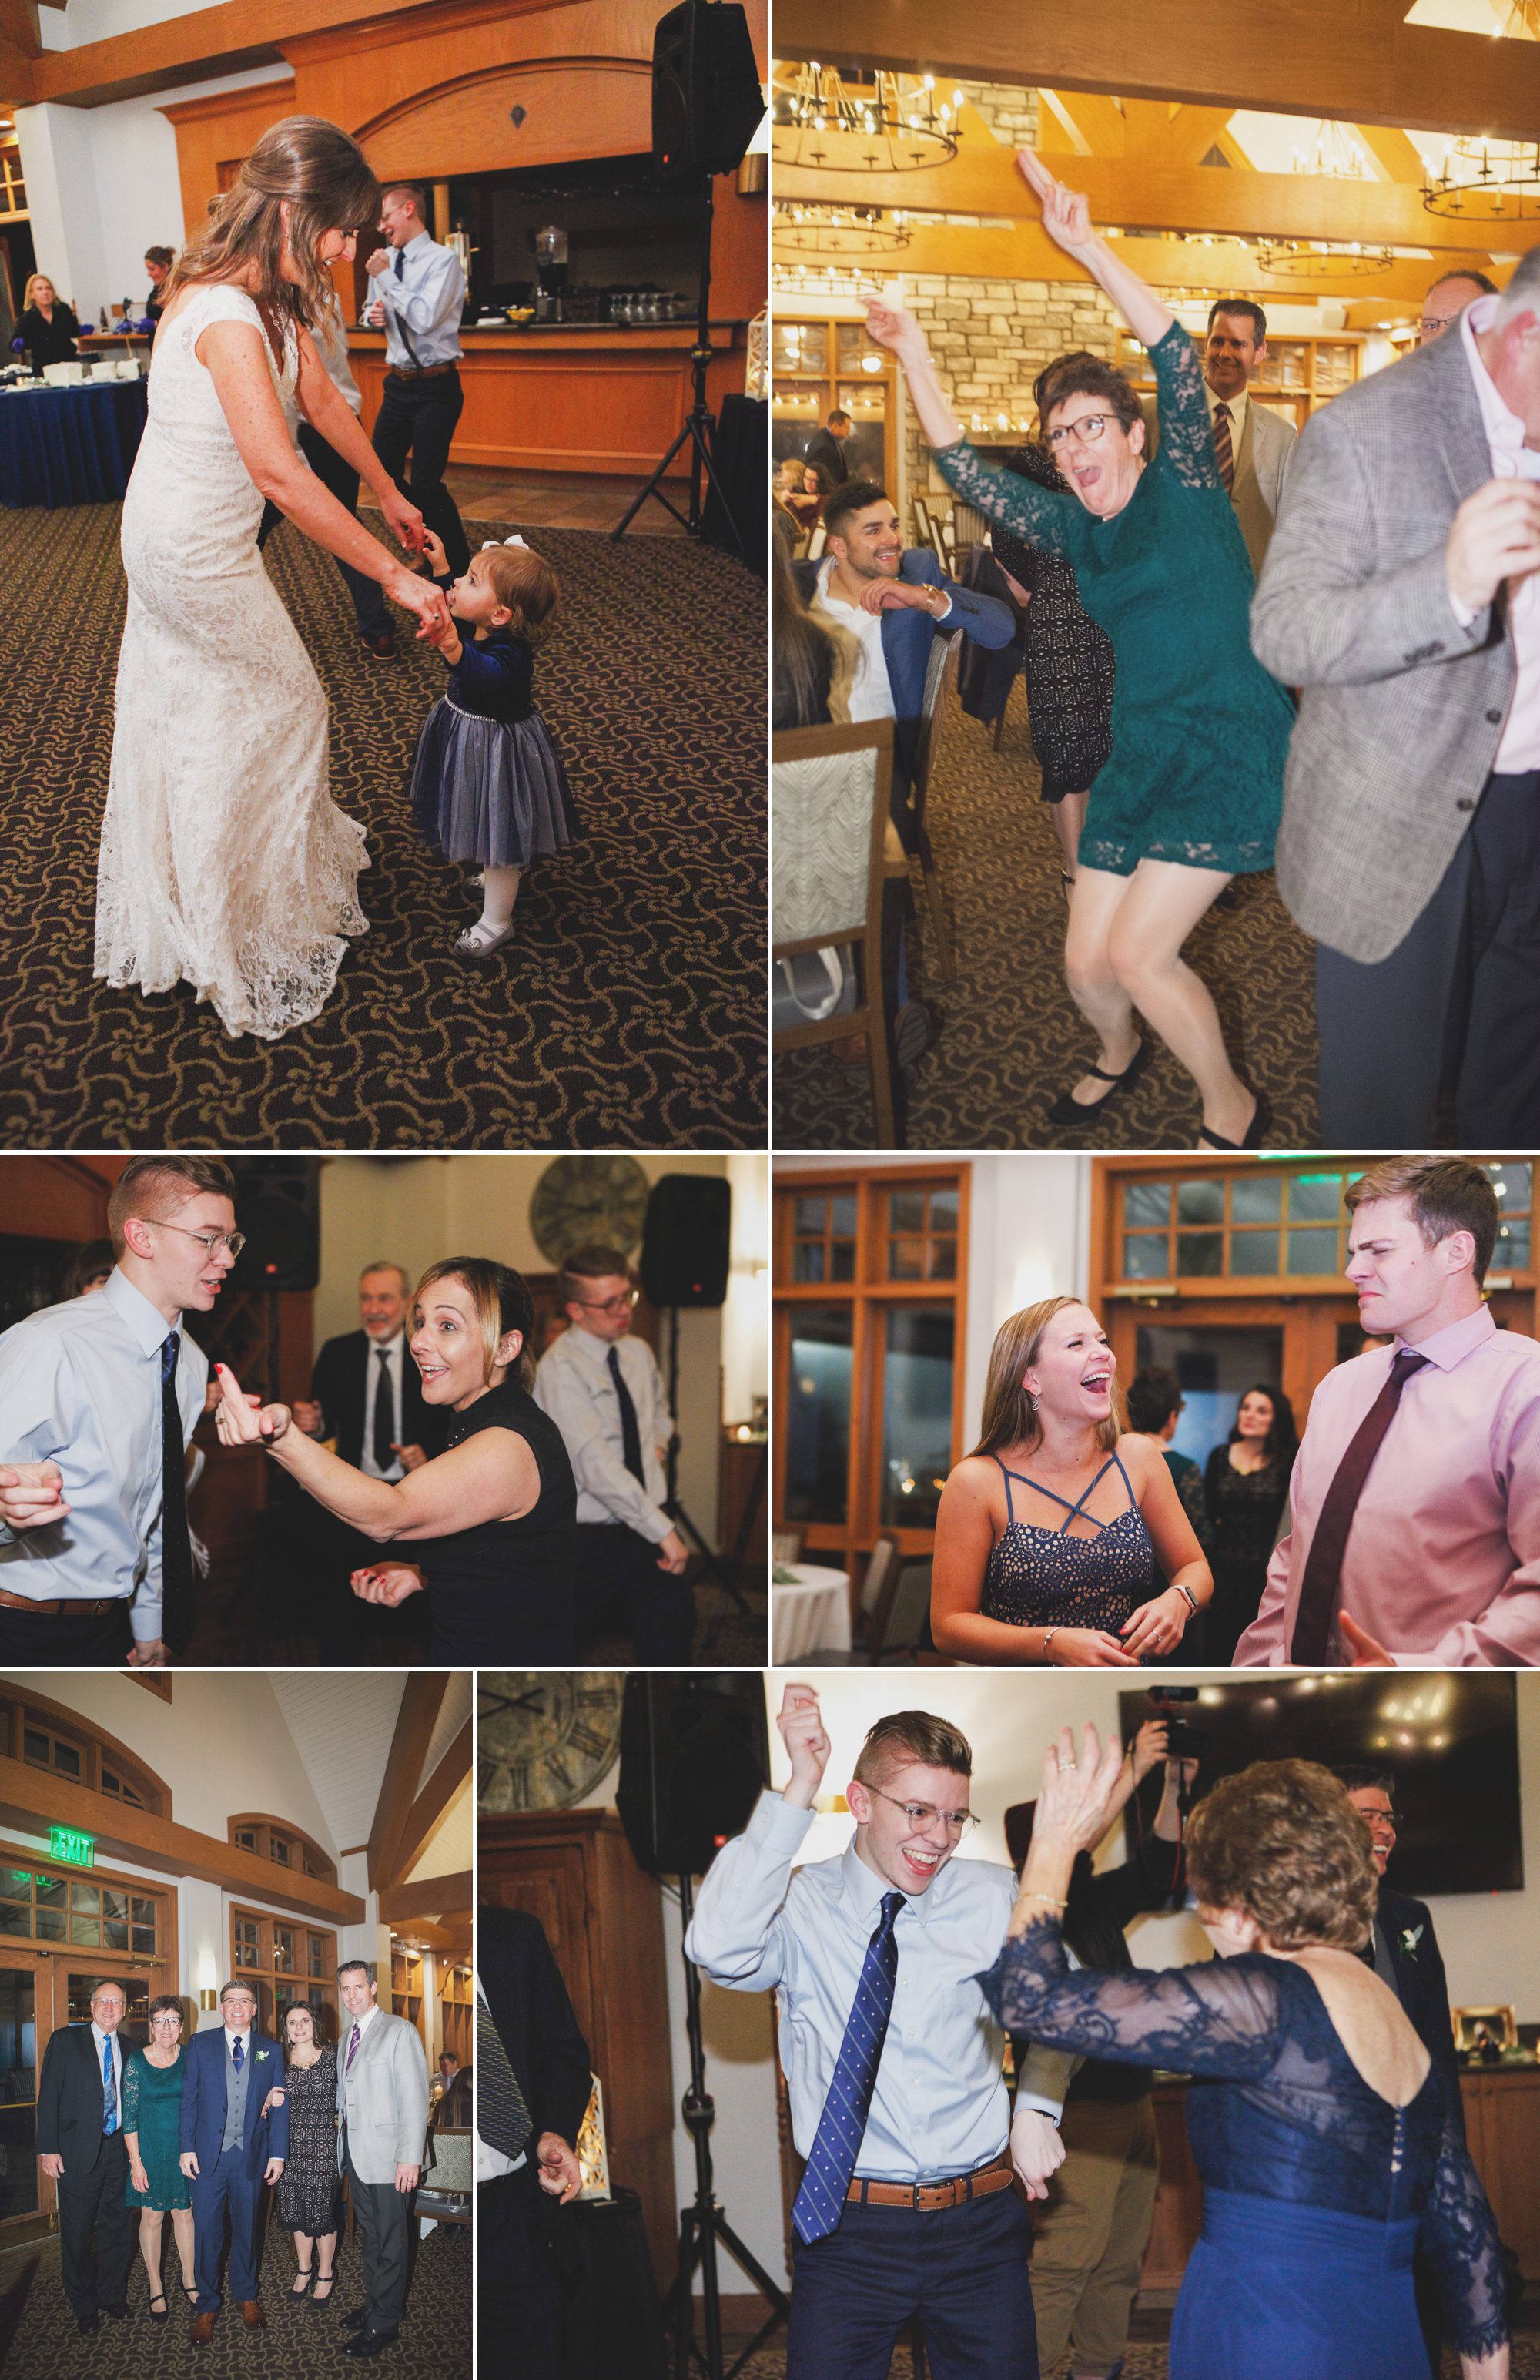 Dancing at reception in clubhouse after wedding. Winter wedding at Vanderbilt Legends Golf Course in Brentwood TN, photos by Krista Lee Photography